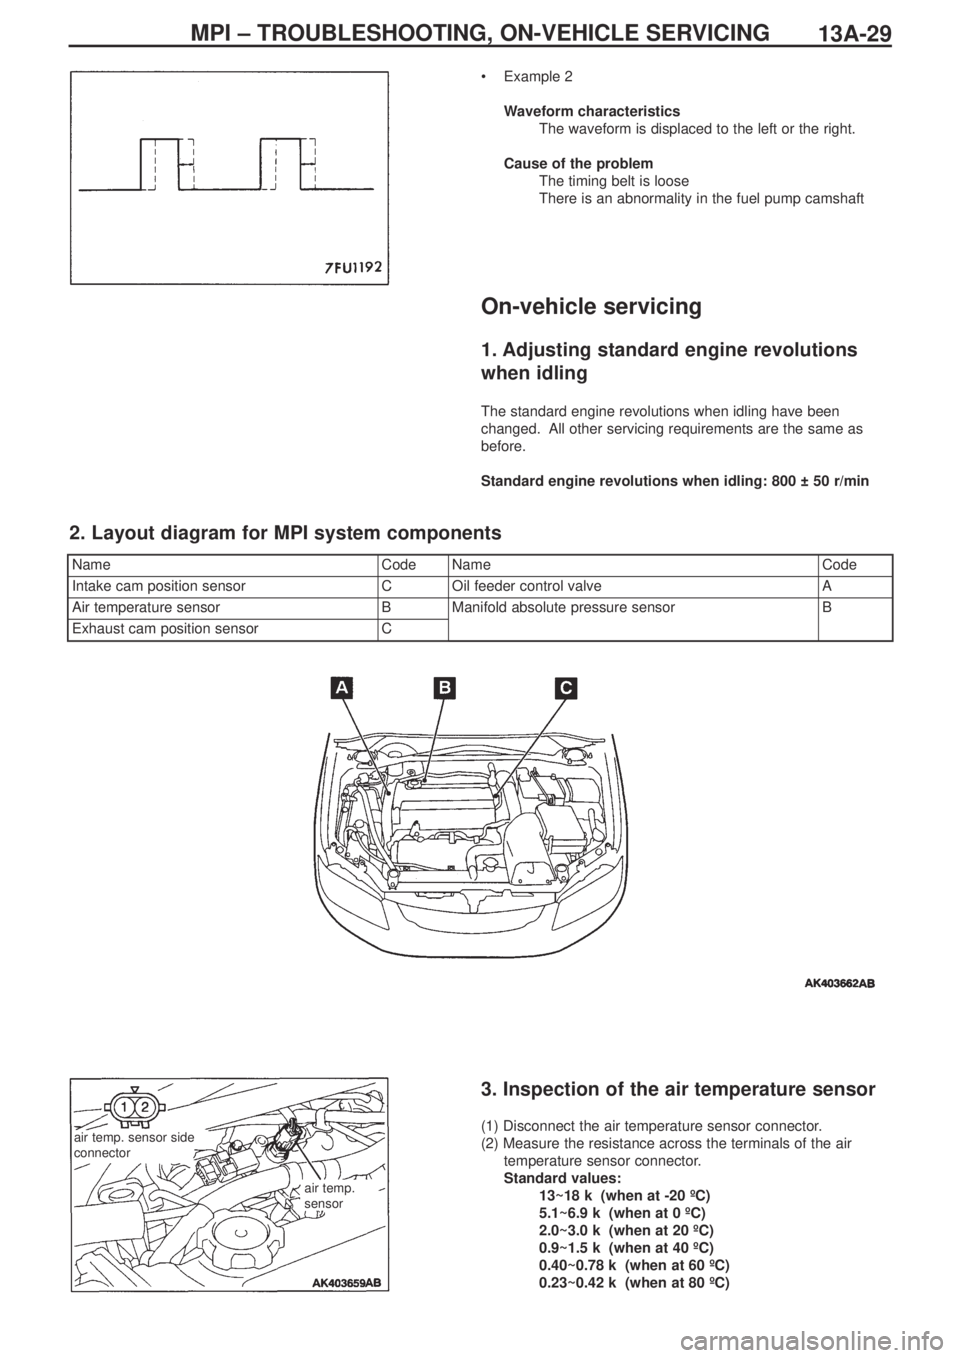 MITSUBISHI LANCER EVOLUTION IX 2005  Workshop Manual 13A-29MPI – TROUBLESHOOTING, ON-VEHICLE SERVICING
•Example 2
Waveform characteristics
The waveform is displaced to the left or the right.
Cause of the problem
The timing belt is loose
There is an 